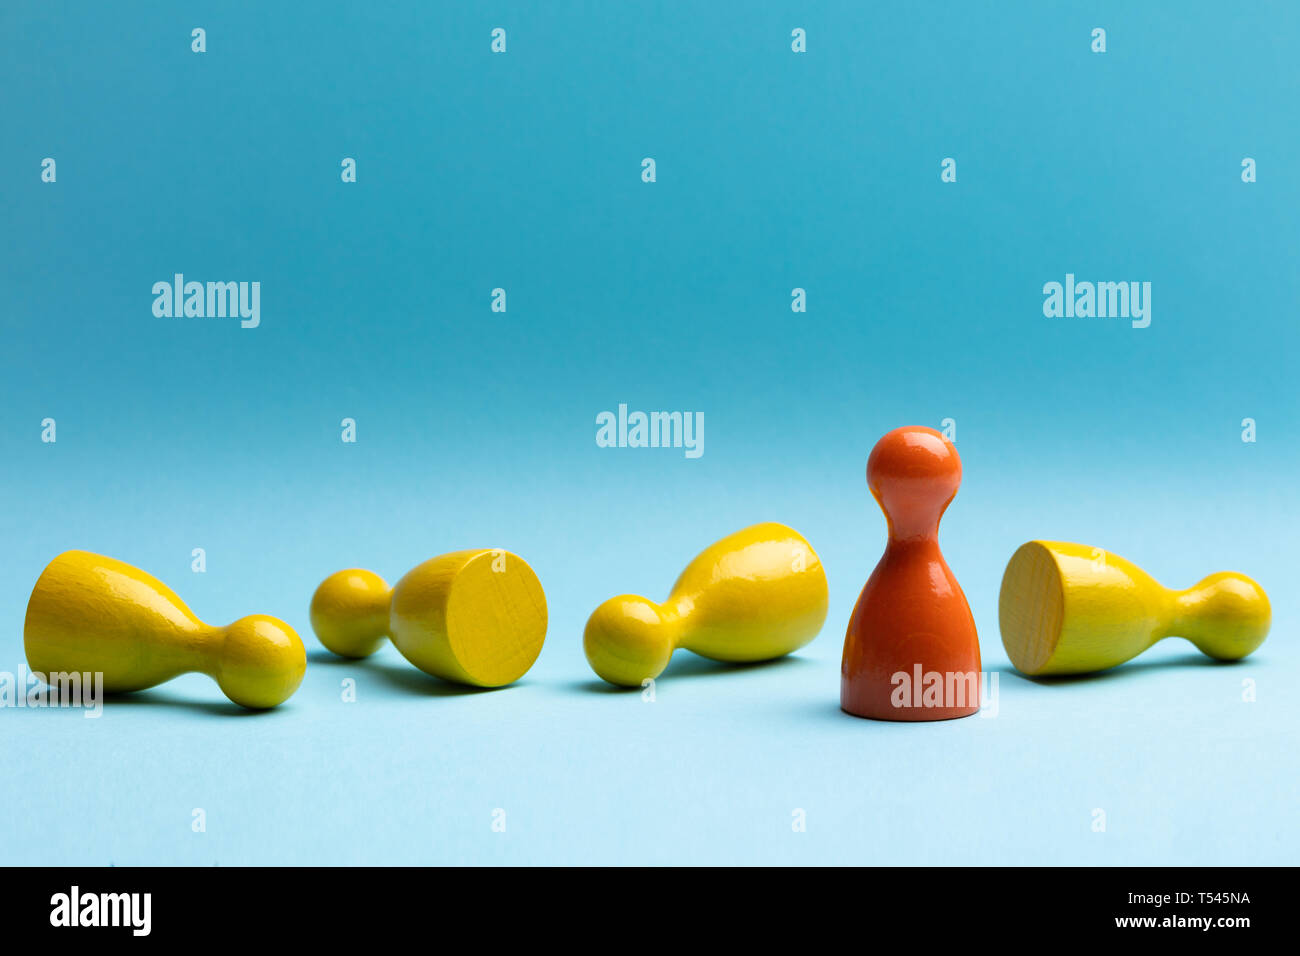 Red Standing Pawn With Fallen Yellow Pawn On Blue Surface Stock Photo